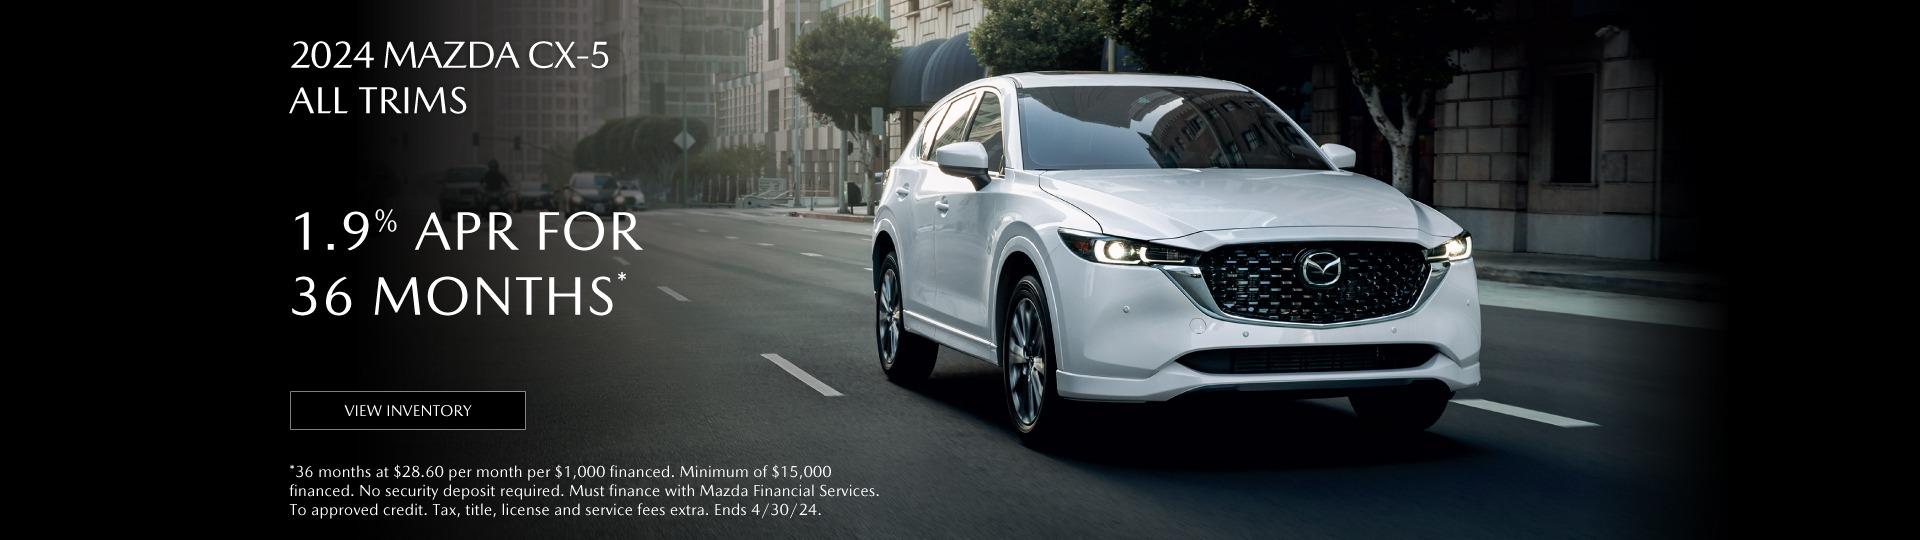 2024 Mazda CX-5 1.9%APR for 36 months